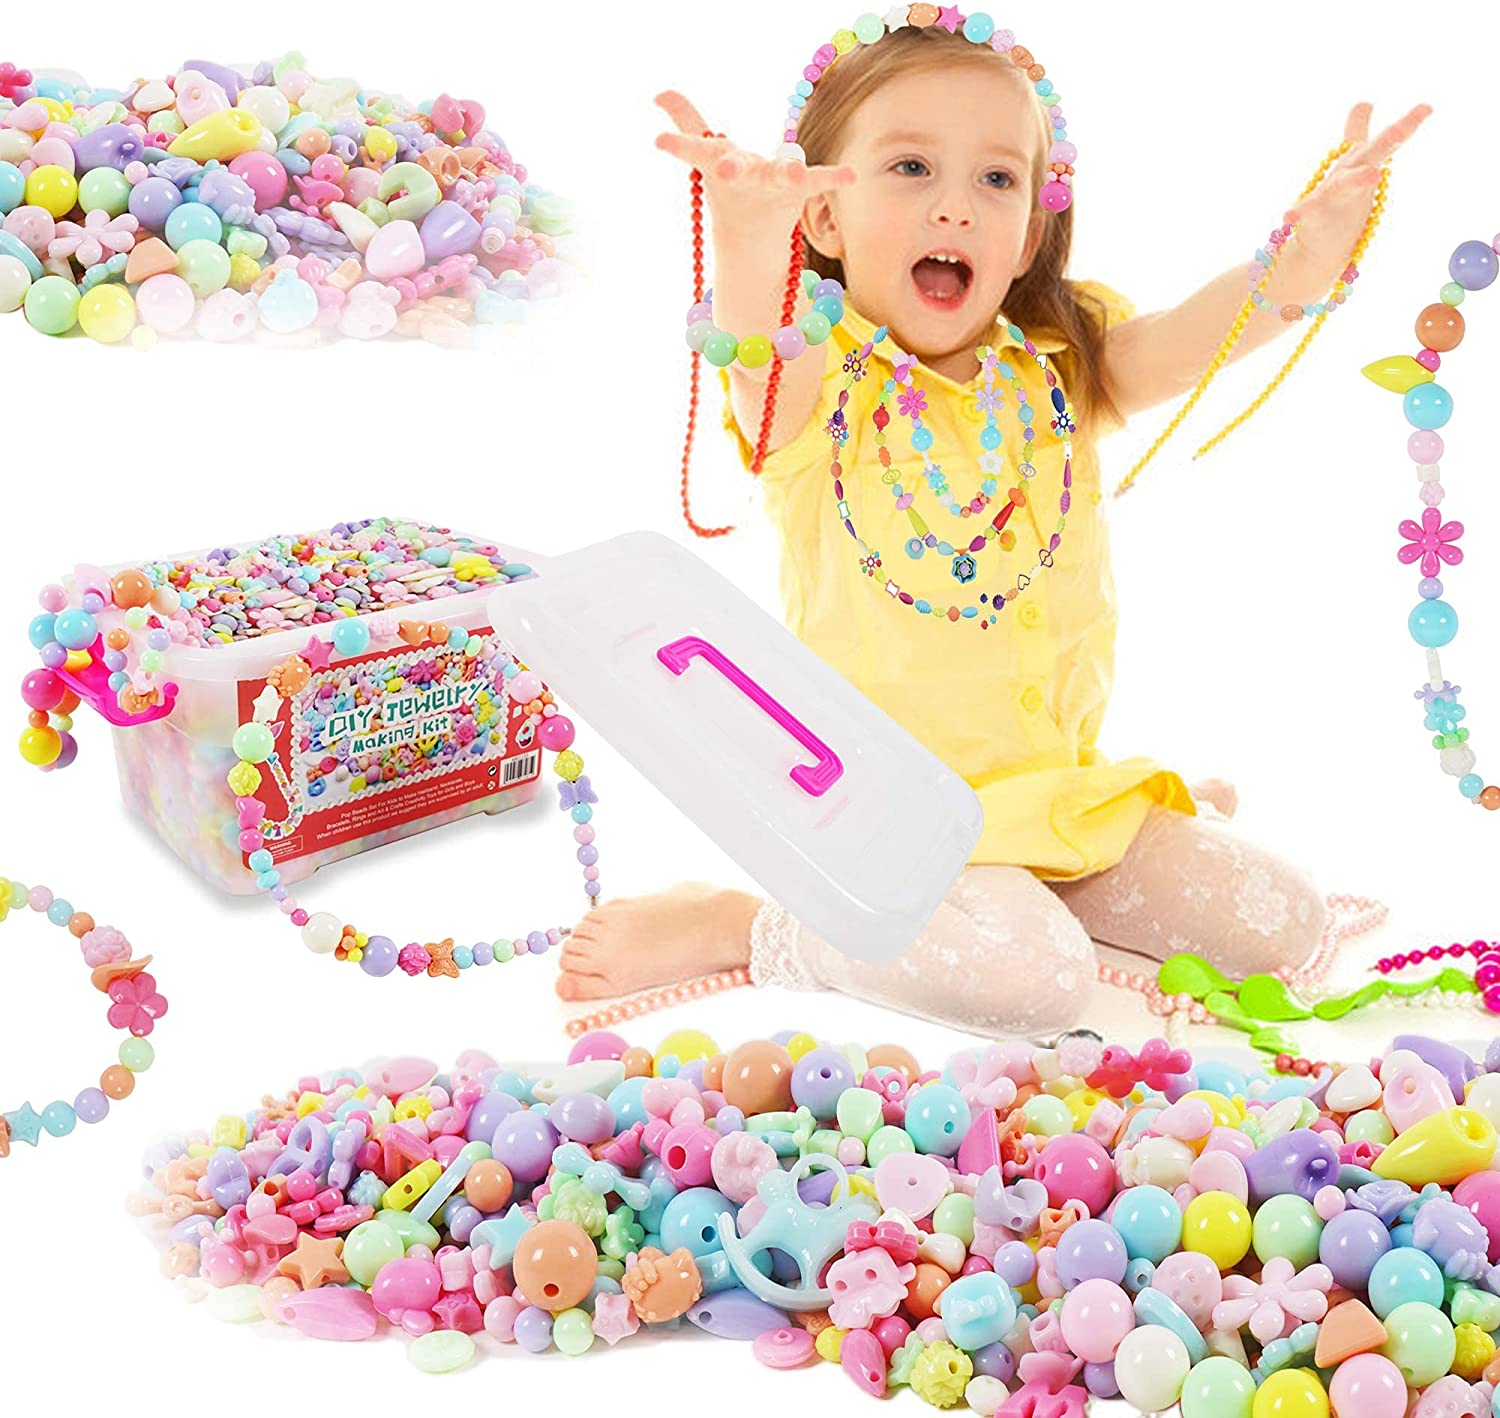 KIDDYCOLOR Jewelry Making Kit, 1000PCS DIY Beads Craft Toys for 3-8 Year Old Girls, for Christmas Birthday Gift